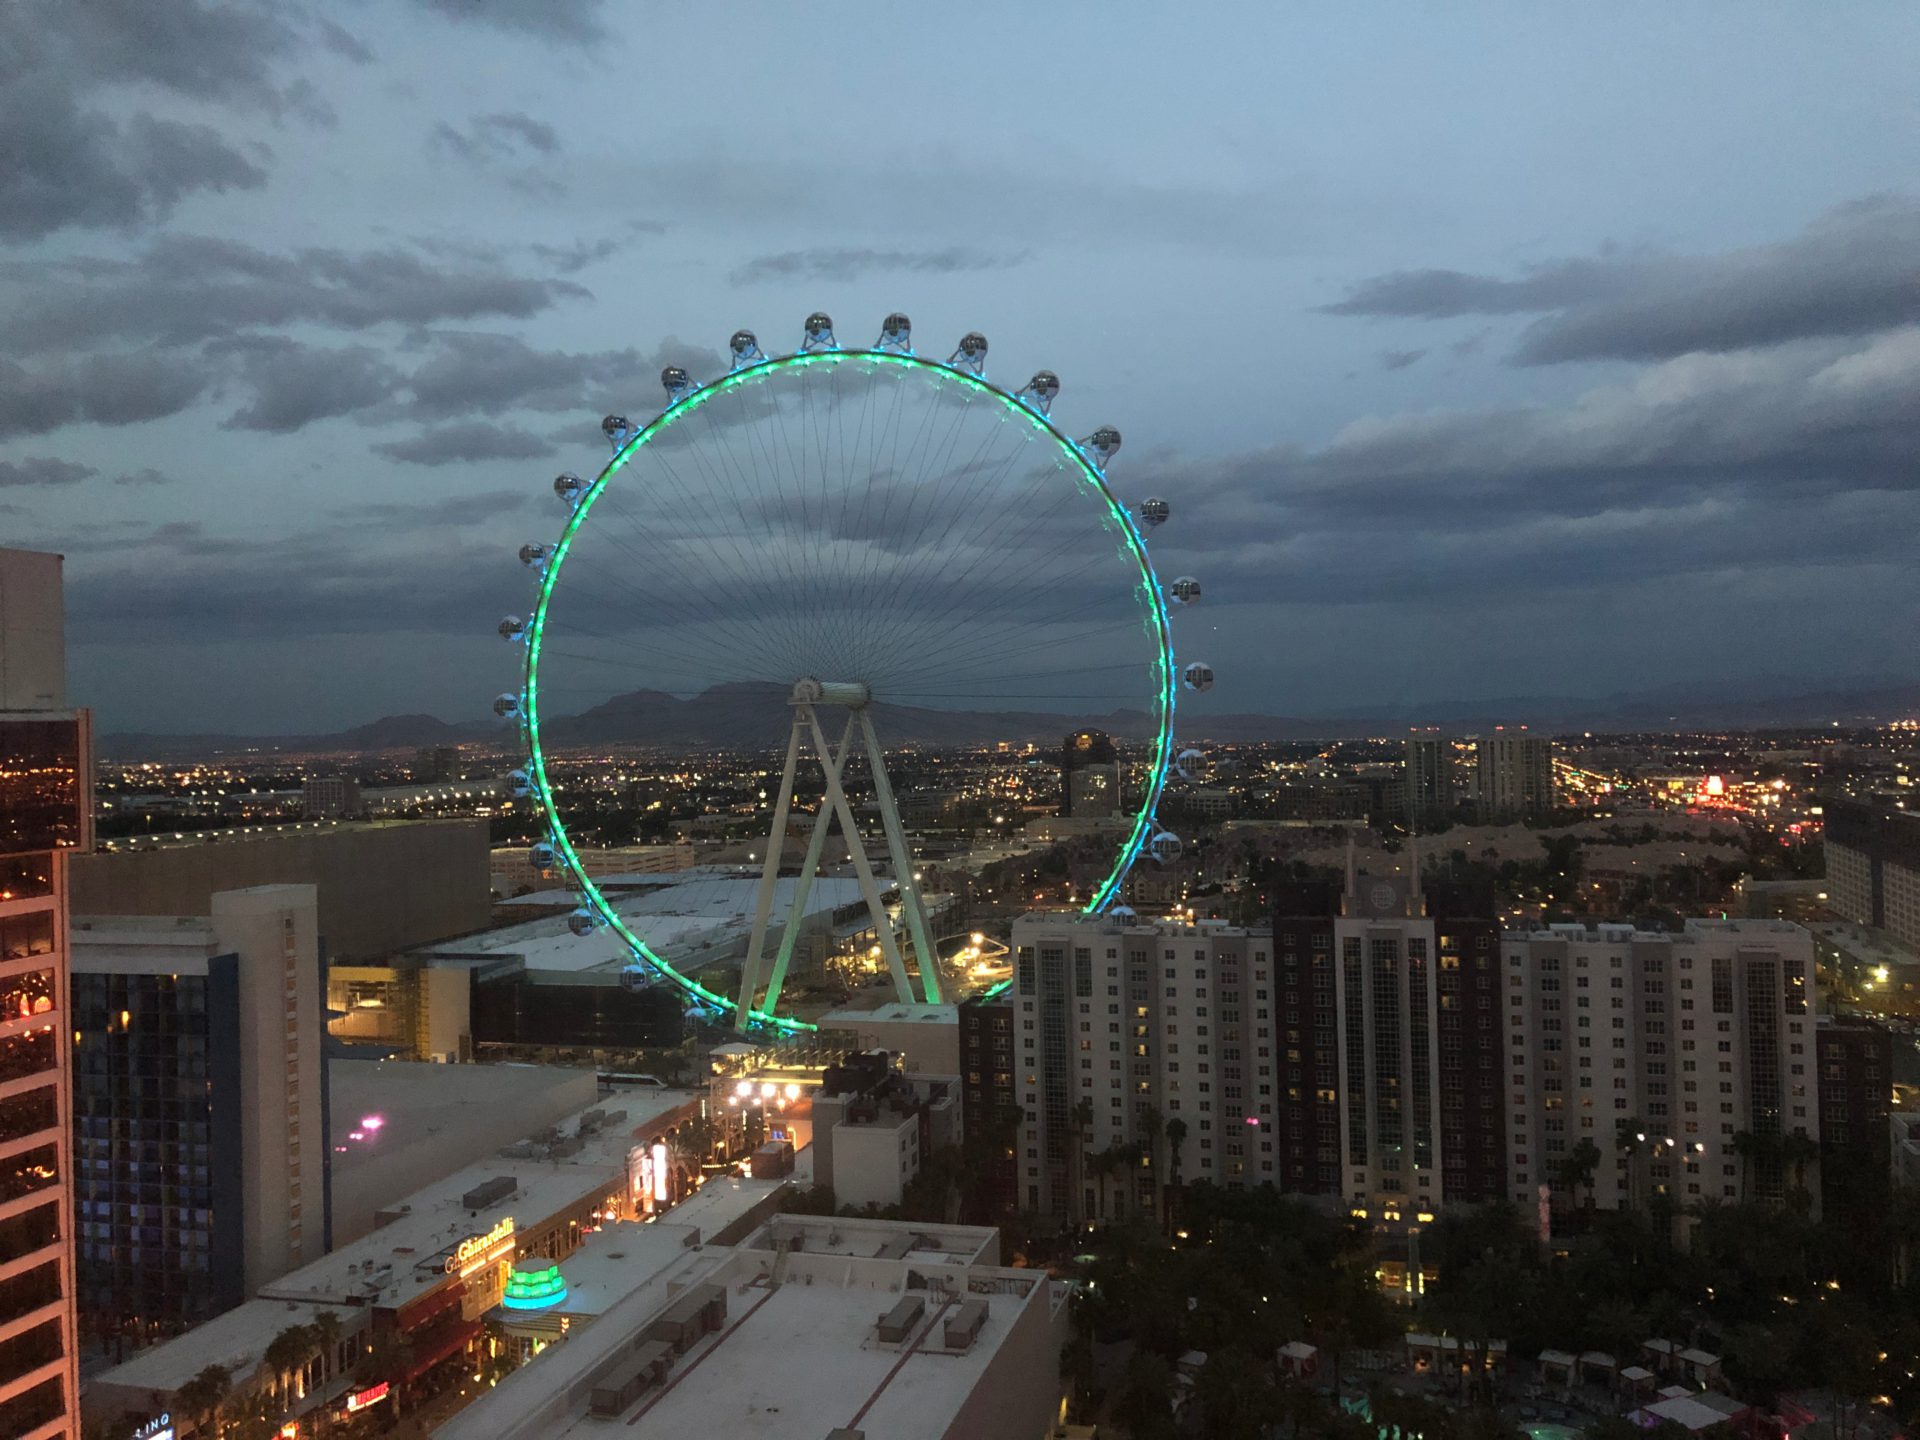 The High Roller Ferris Wheel at night is a towering structure decorated with vibrant LED lights and casting it's colorful reflections across the Las Vegas skyline.